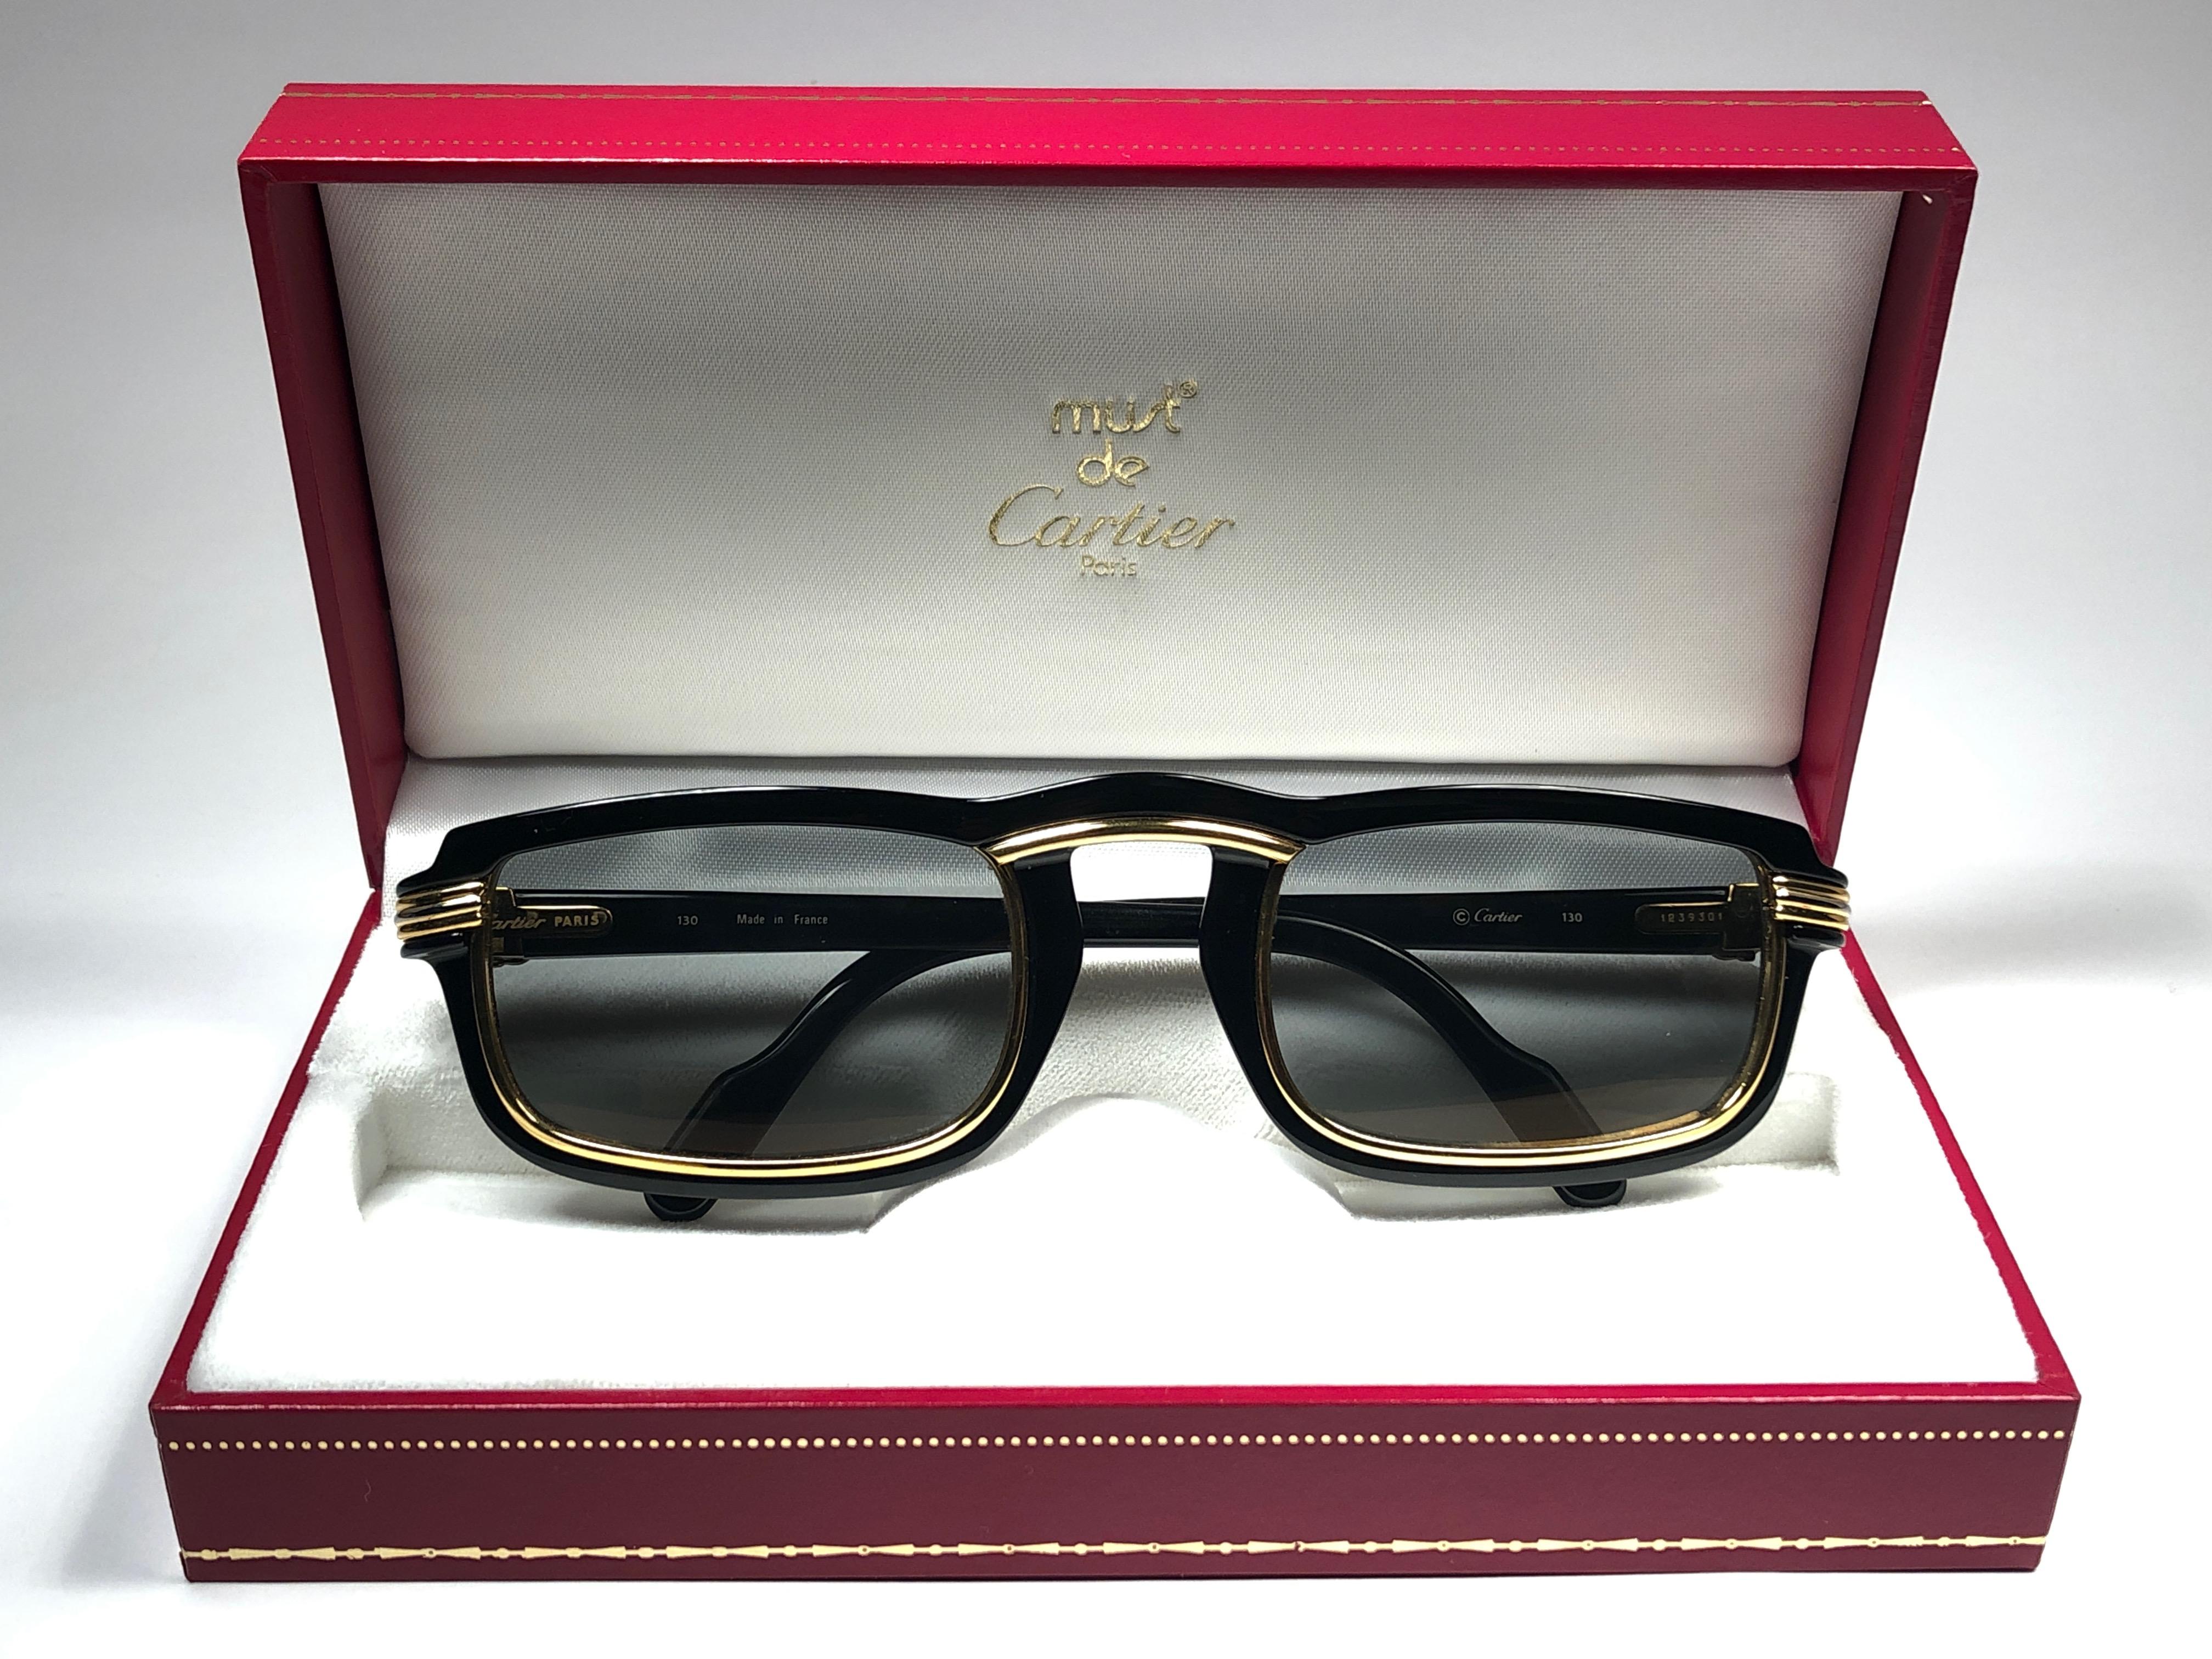 New 1991 Original Cartier Vertigo Art Deco Sunglasses with spotless amazing Cartier (uv protection) lenses.
Frame has the famous real gold and white gold accents in the middle and on the sides.
All hallmarks. Cartier gold signs on the earpaddles.